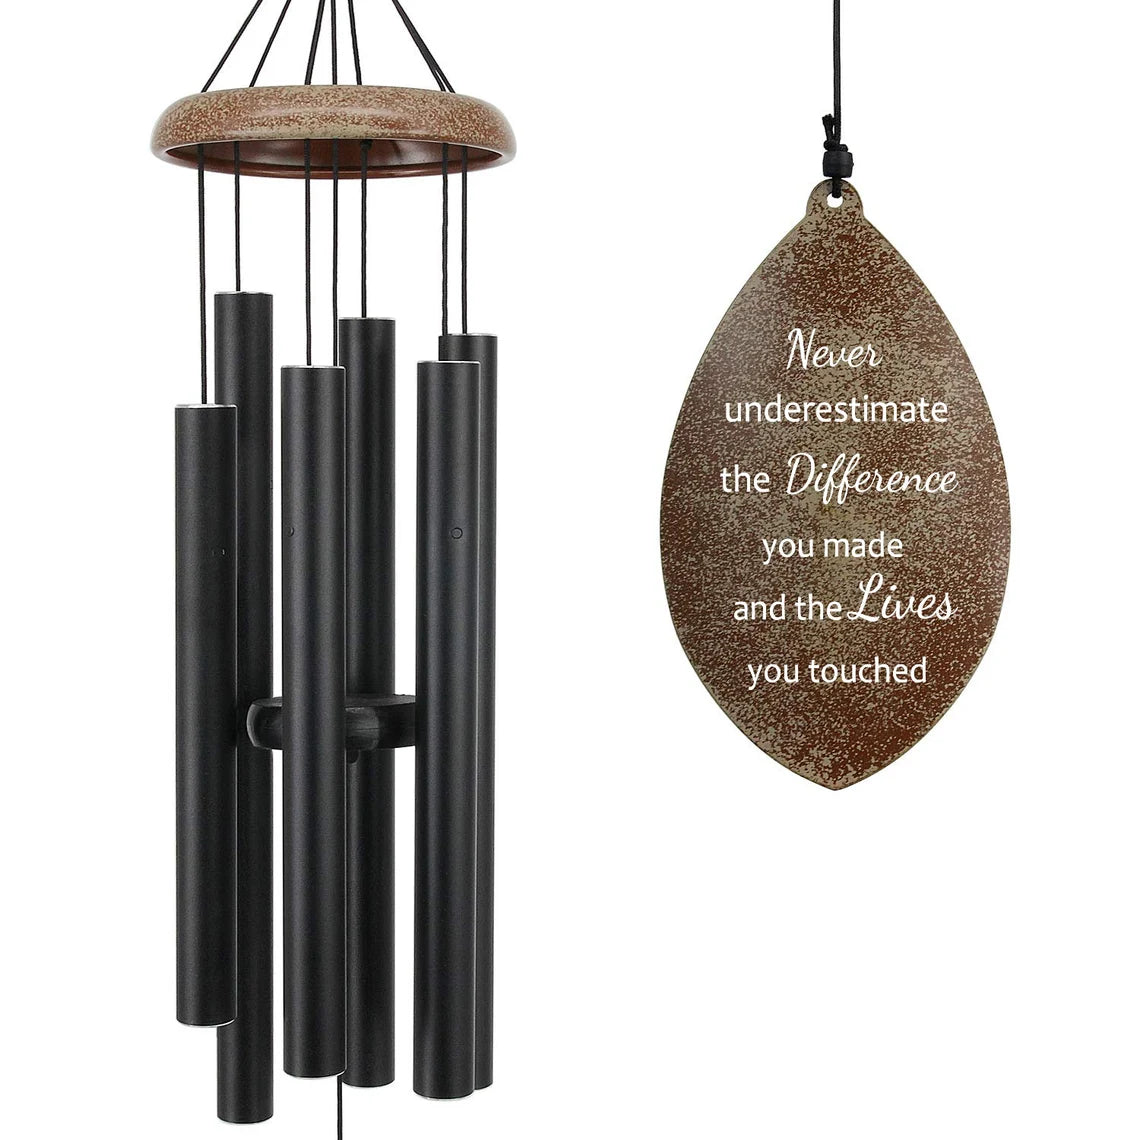 Personalized Retirement Gift Wind Chimes-35 inch, 6 Tubes, Golden/Black-Leaf Style - Astarin